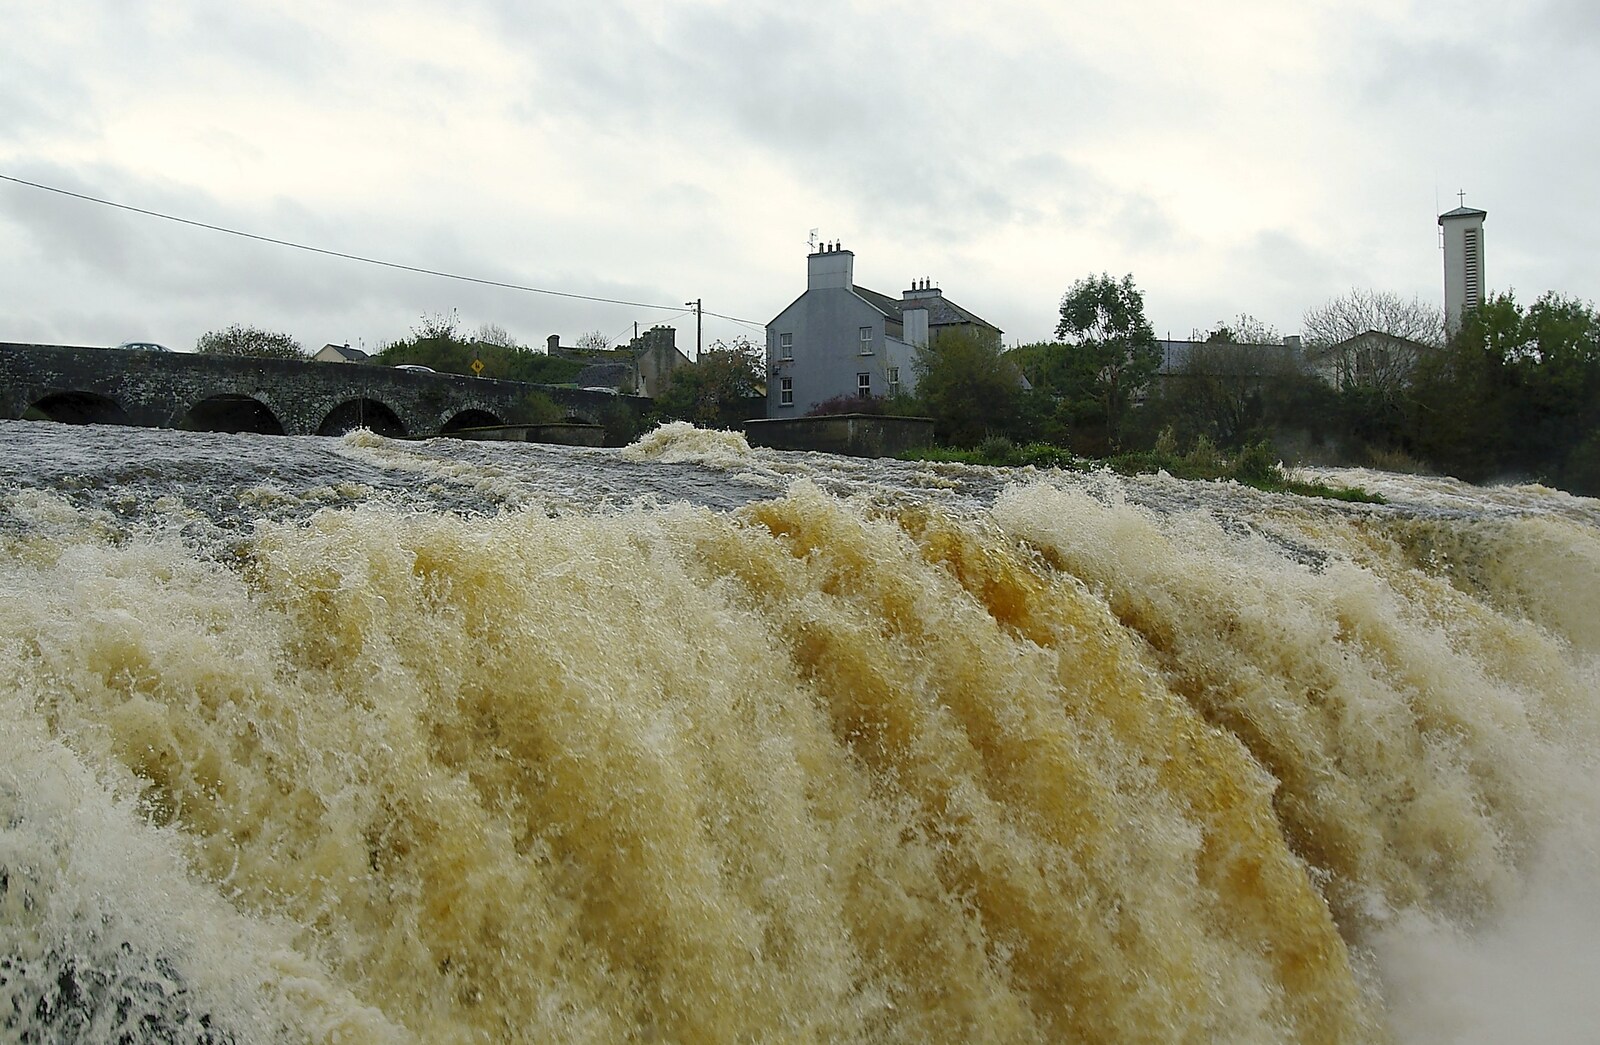 The river surges by the aptly-named Cascades from Corofin, Ennistymon and The Burran, County Clare, Western Ireland - 27th October 2006